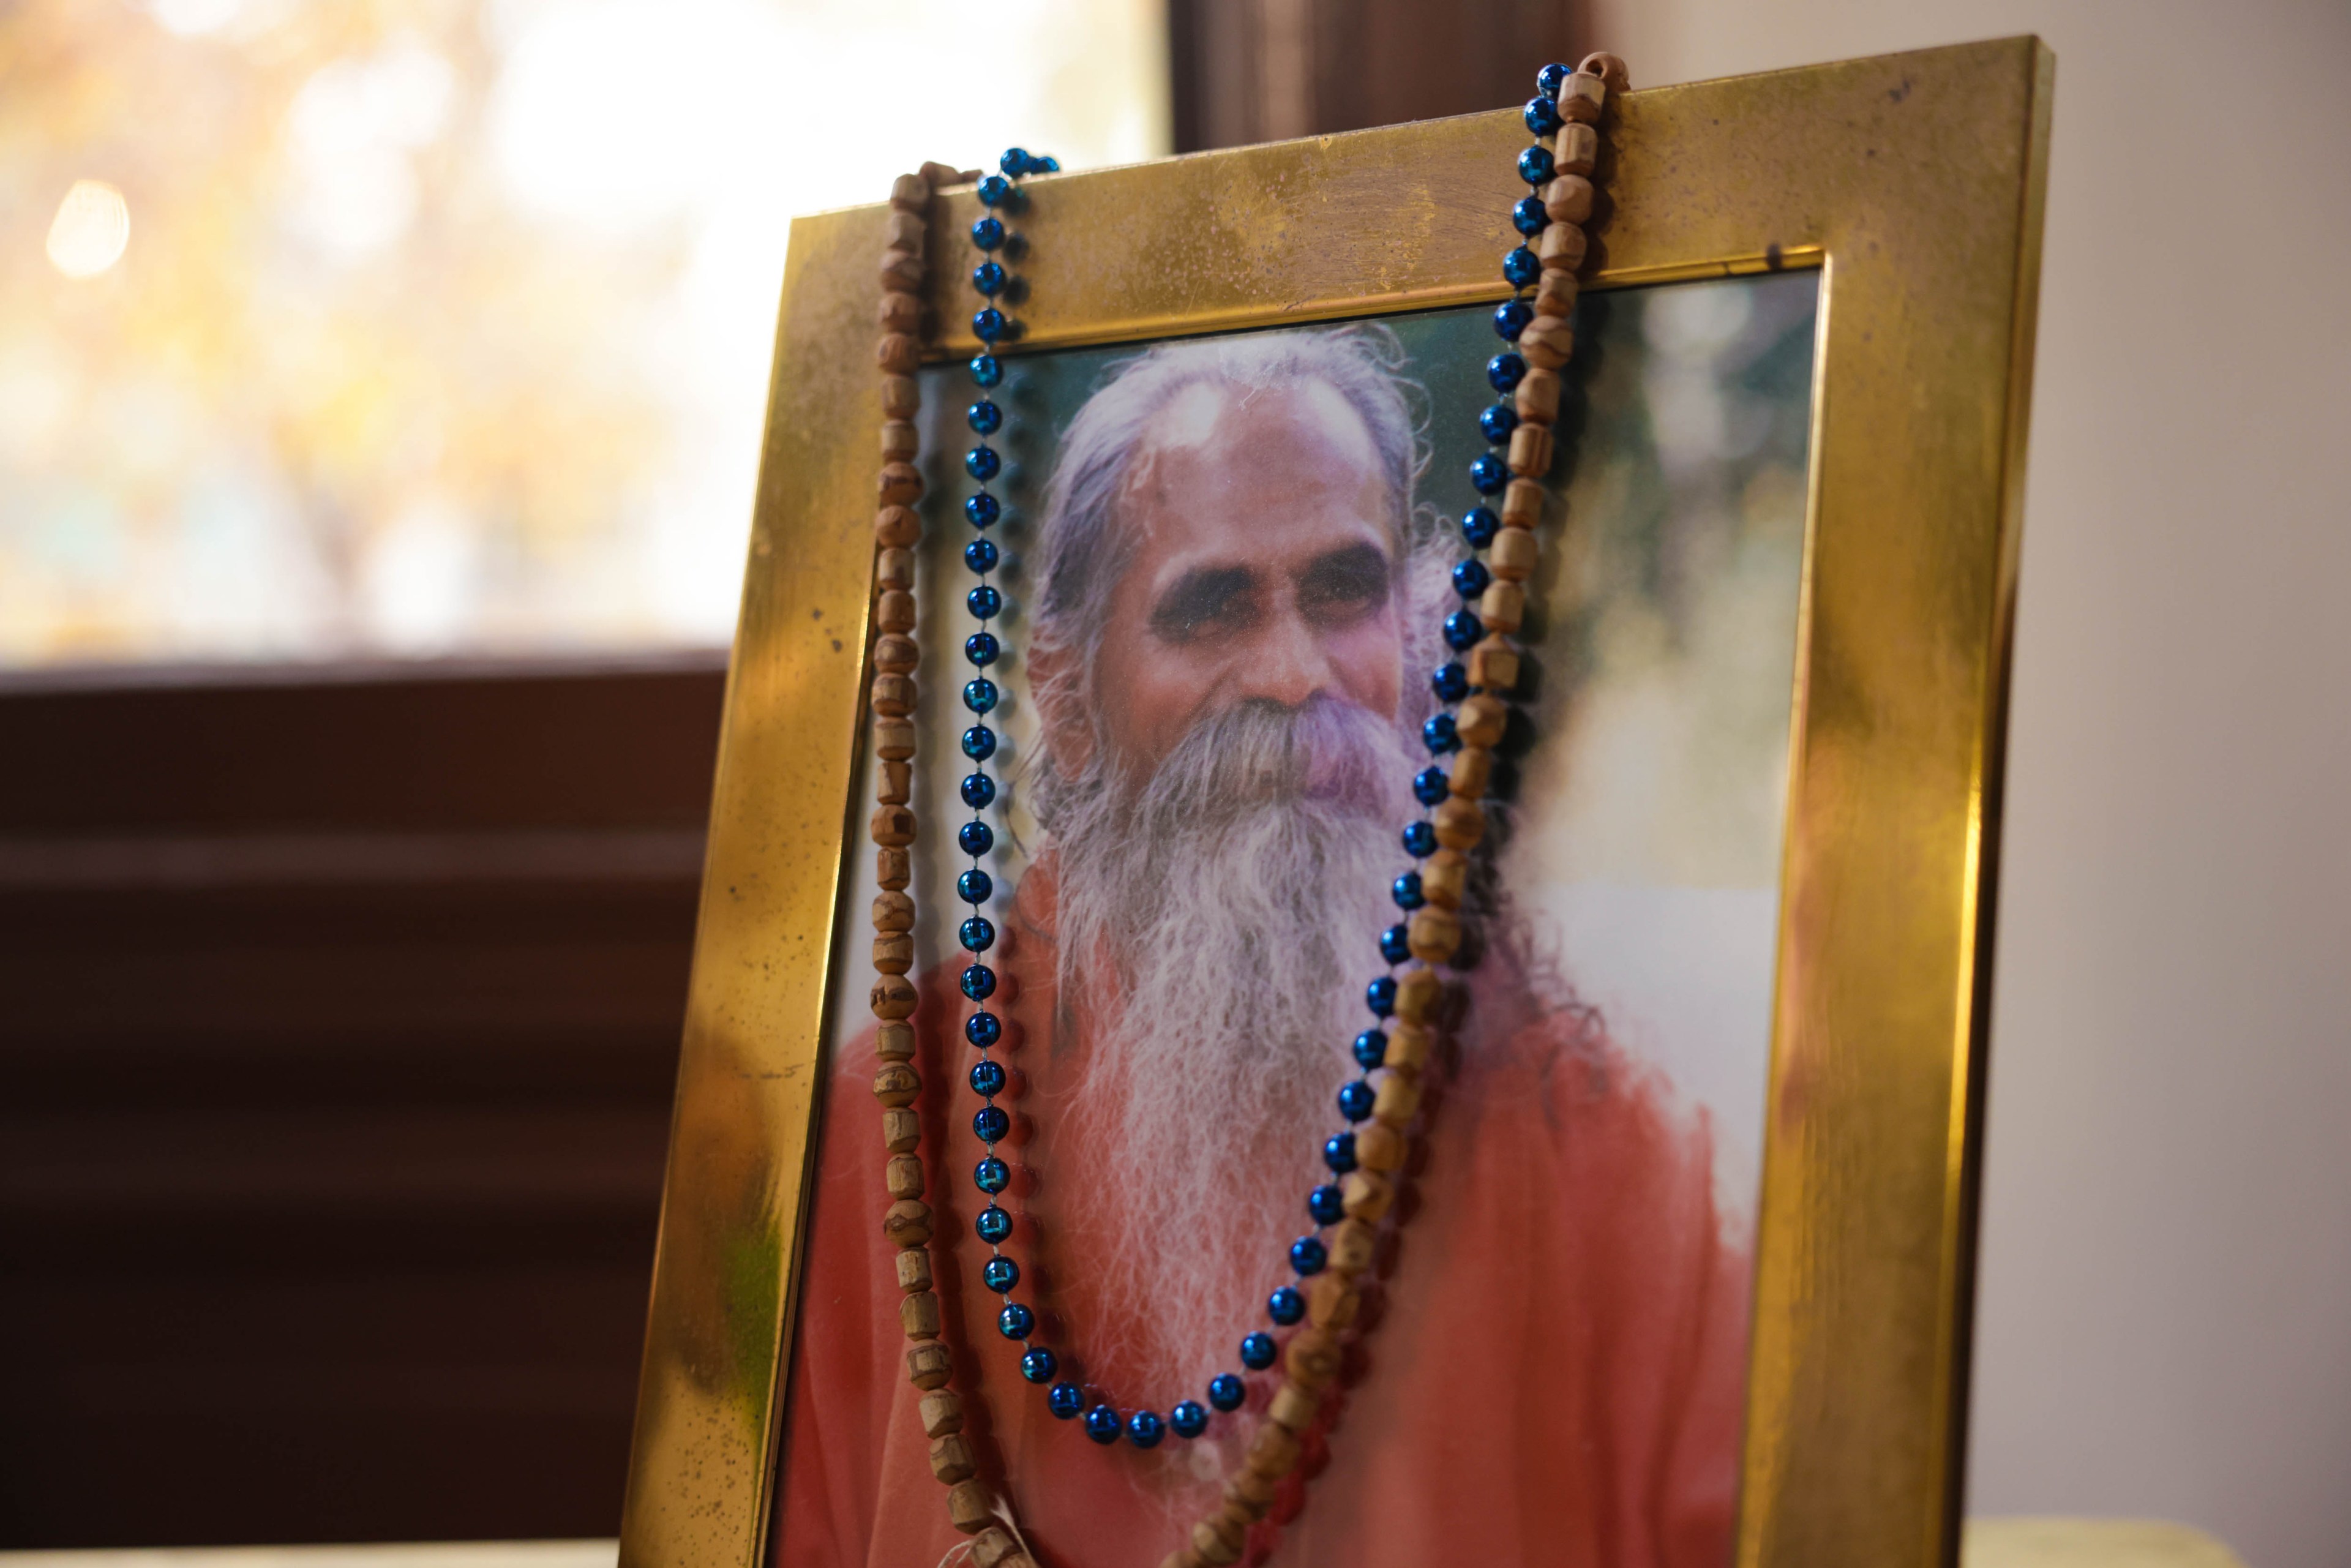 A detail of photo of Shri Brahmananda Sarasvati with beads hanging off the top